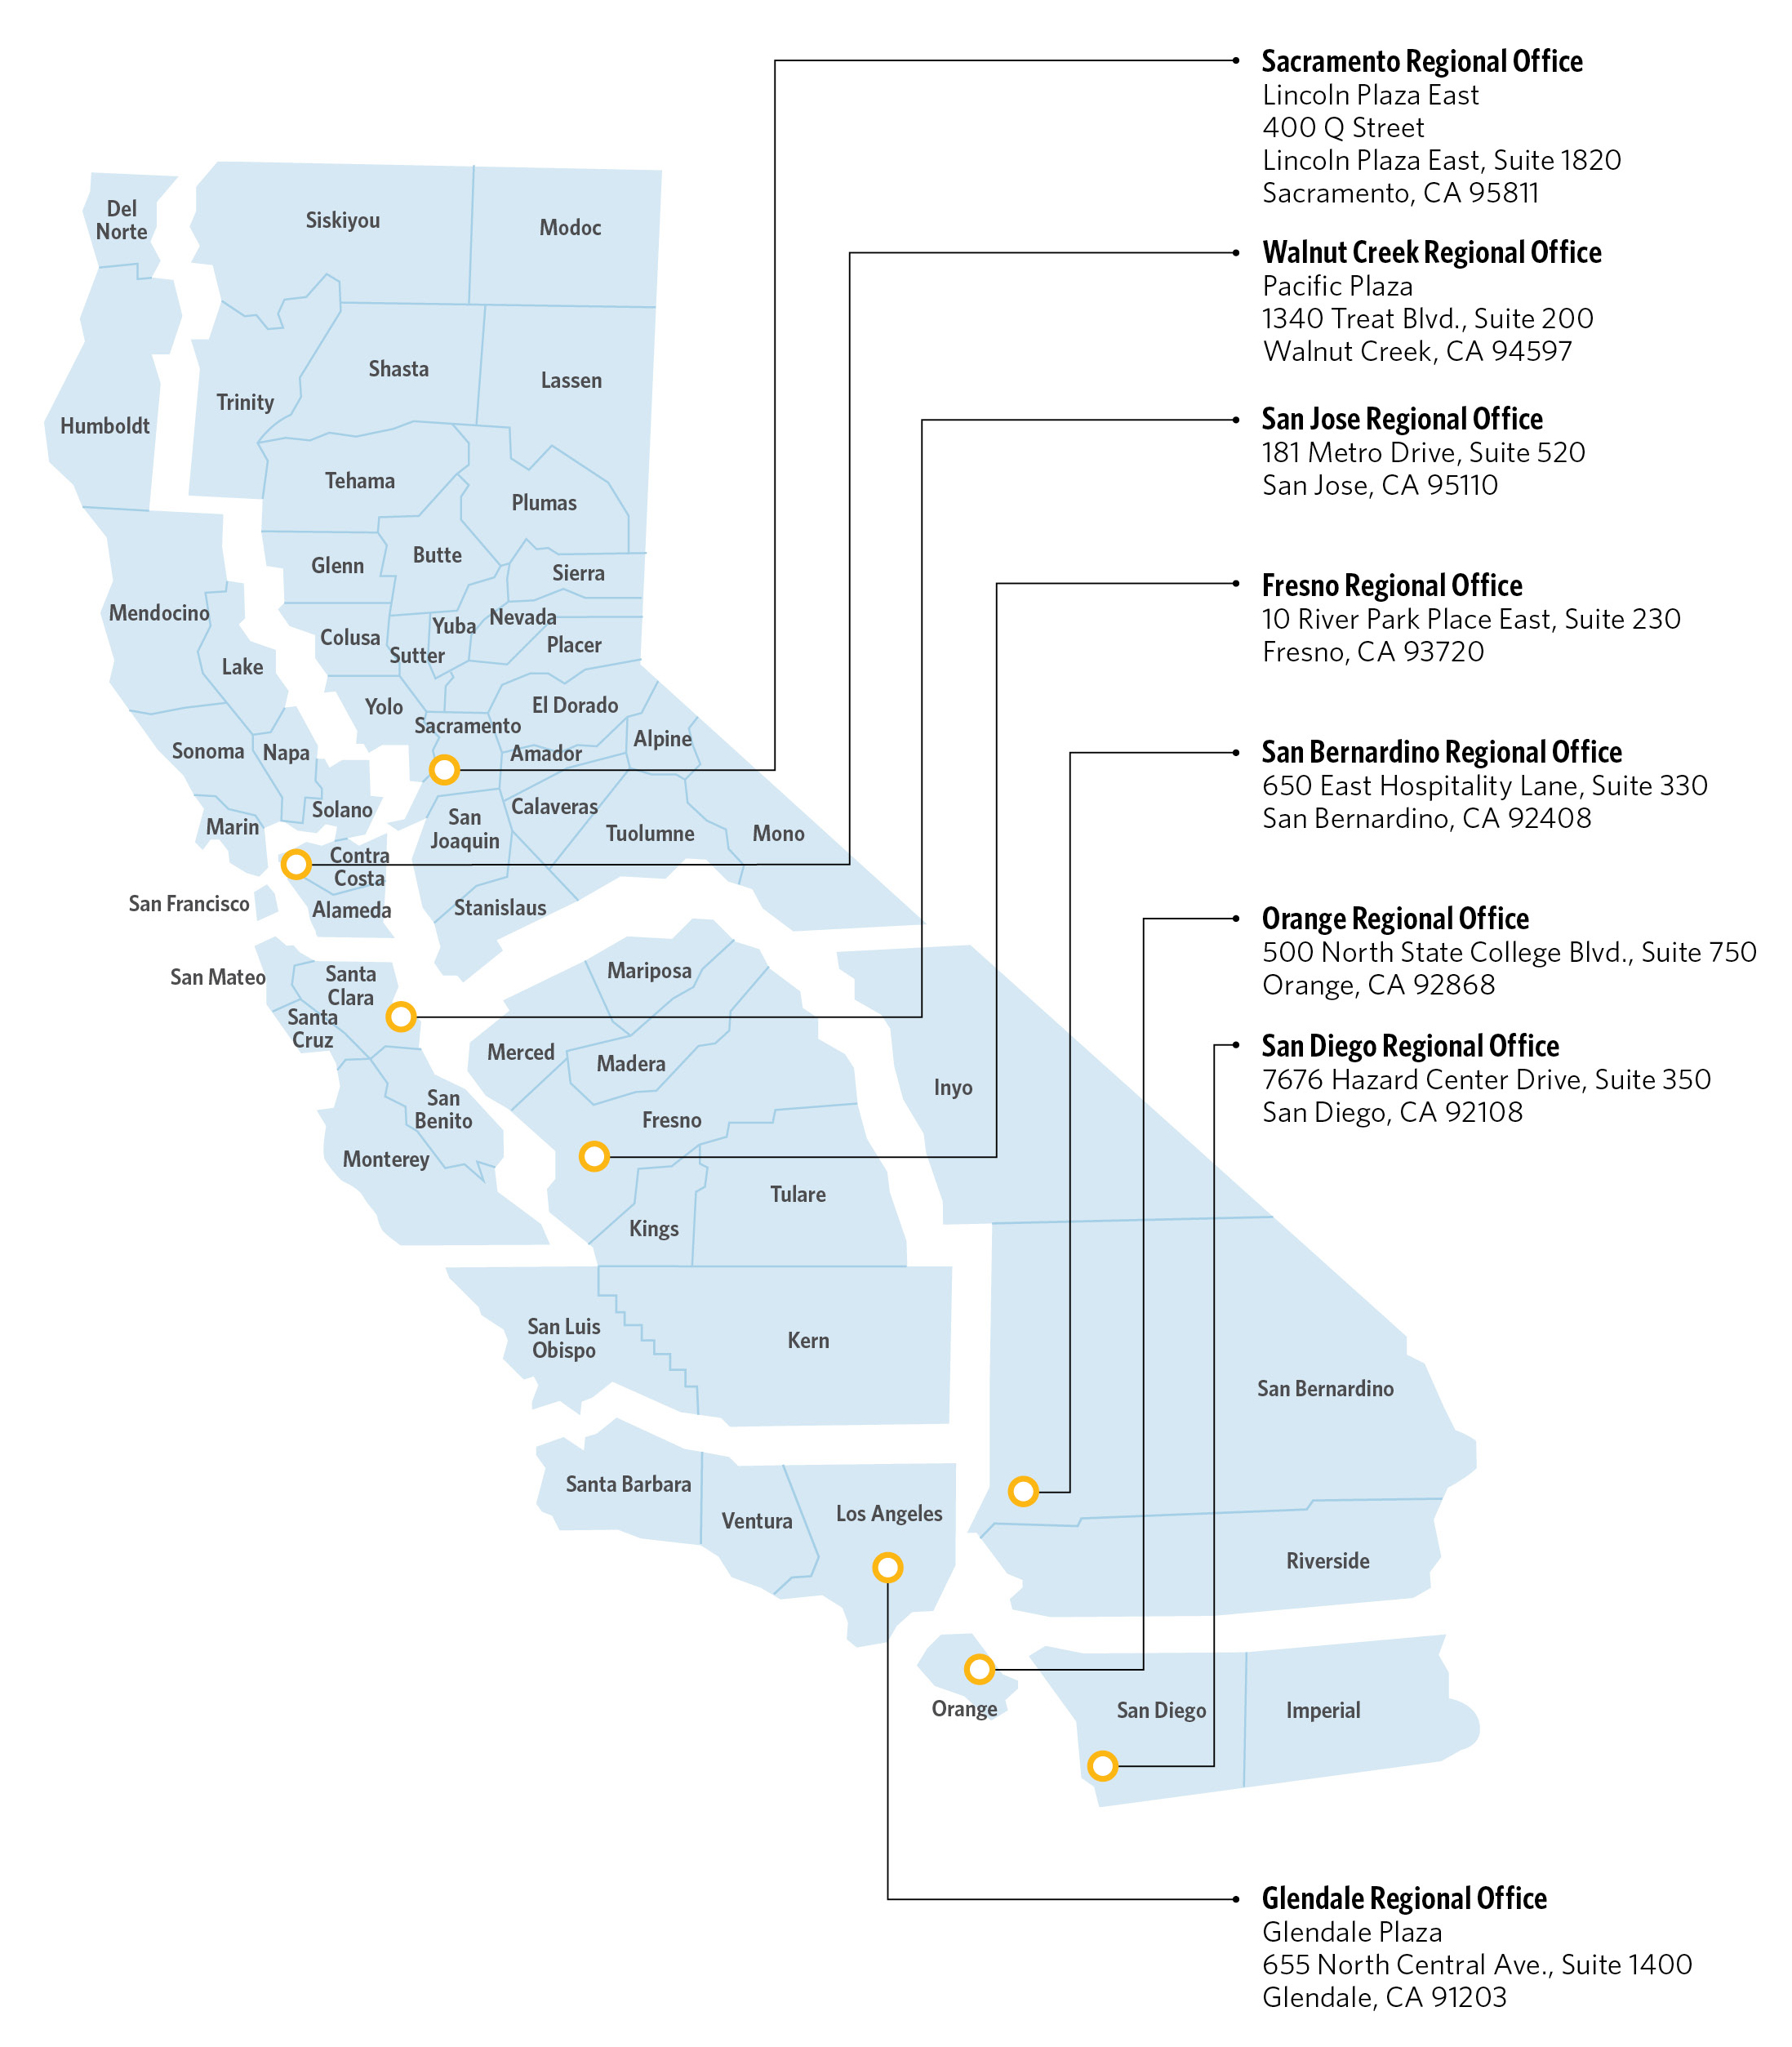 image showing all CalPERS regional offices